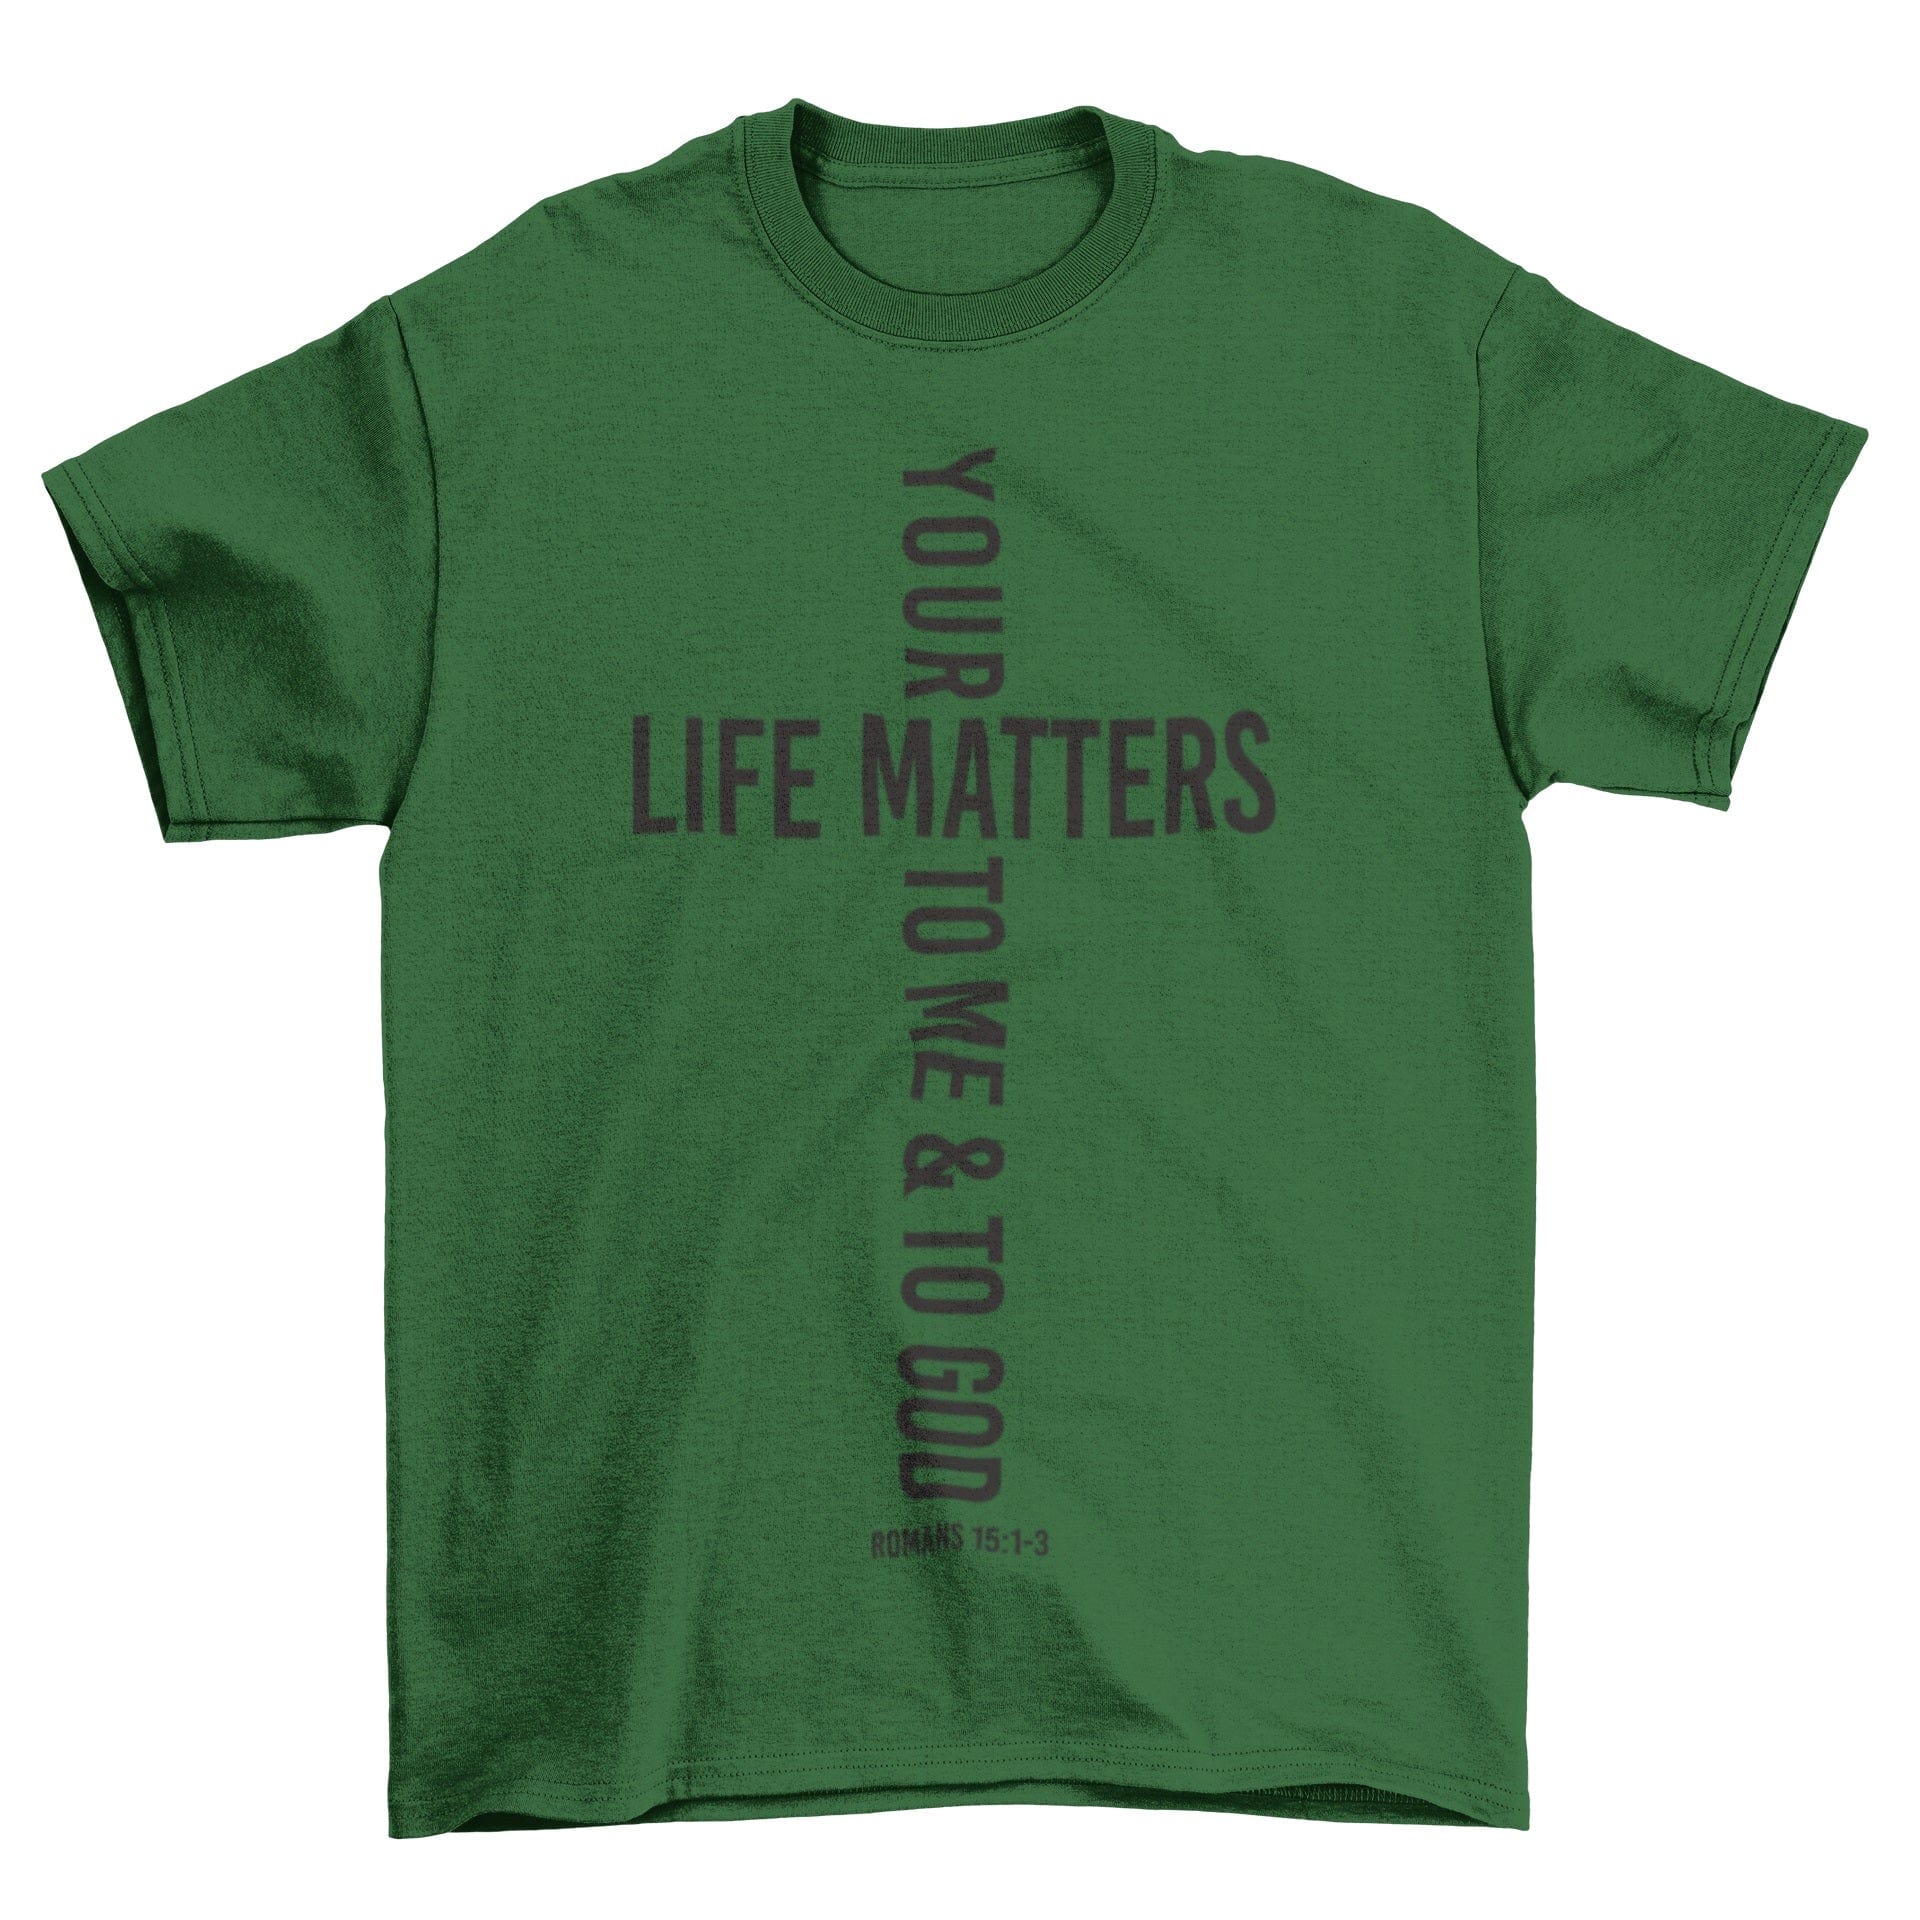 Wrighteous Wear T-Shirt S / Olive Your Life Matters Unisex Christian T-shirt